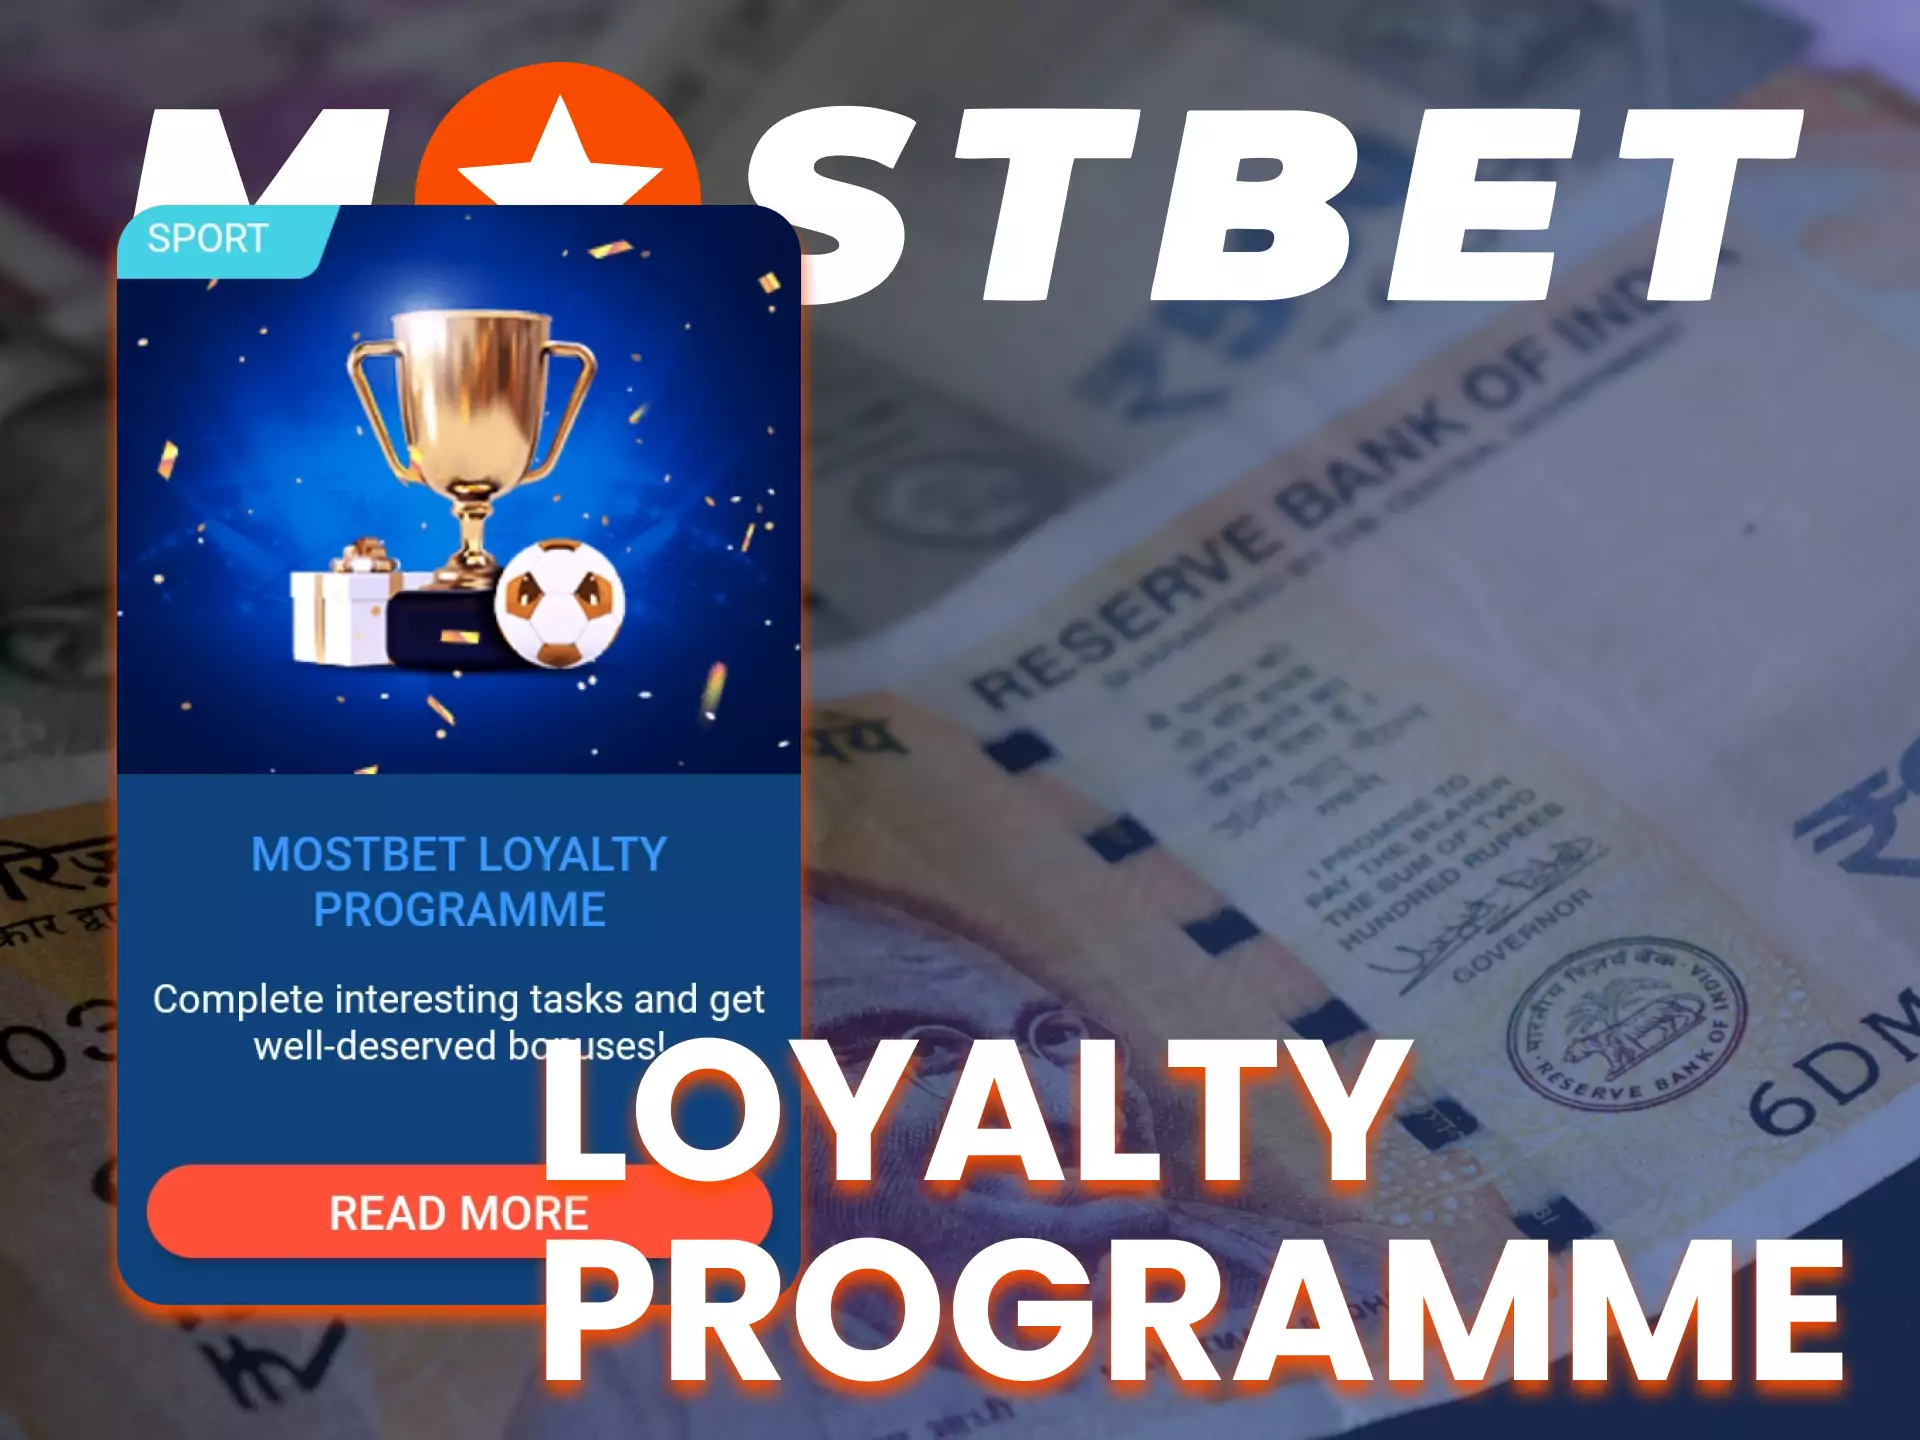 On the Mostbet app, get a special loyalty bonus.